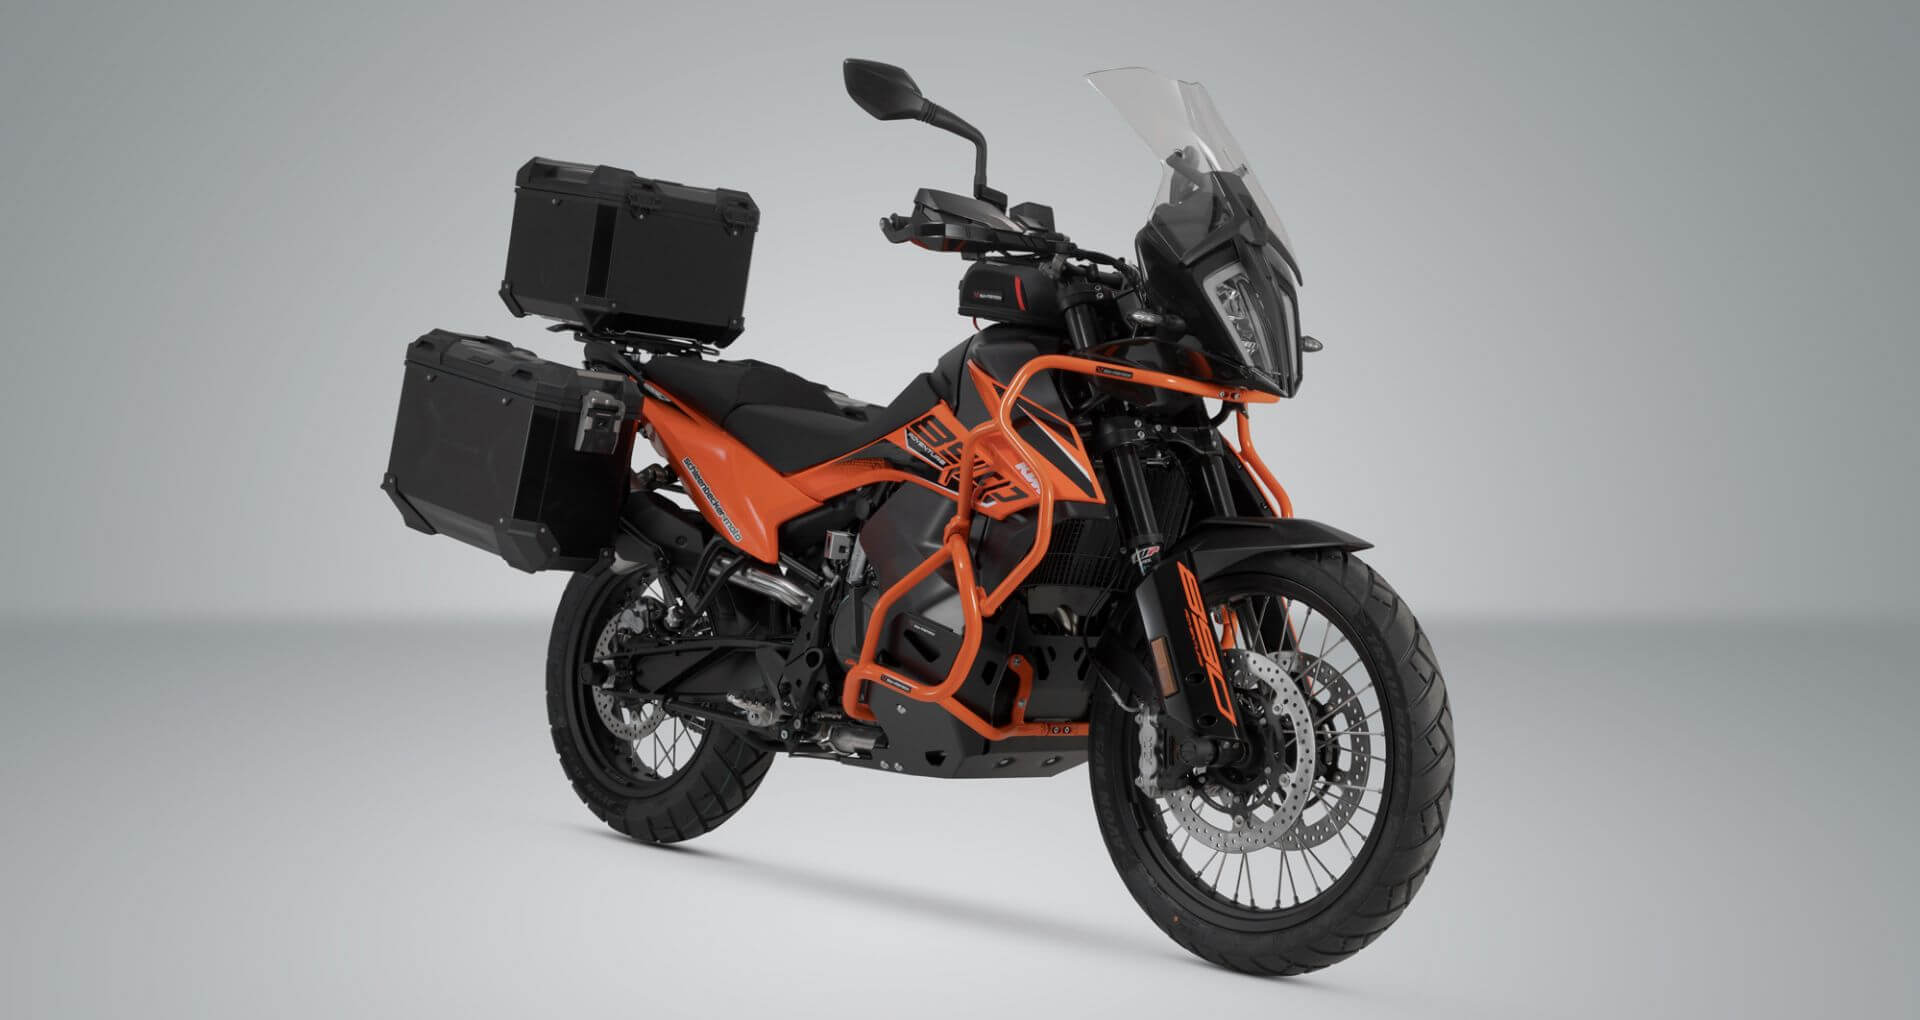 Accessories by SW-MOTECH the KTM 890